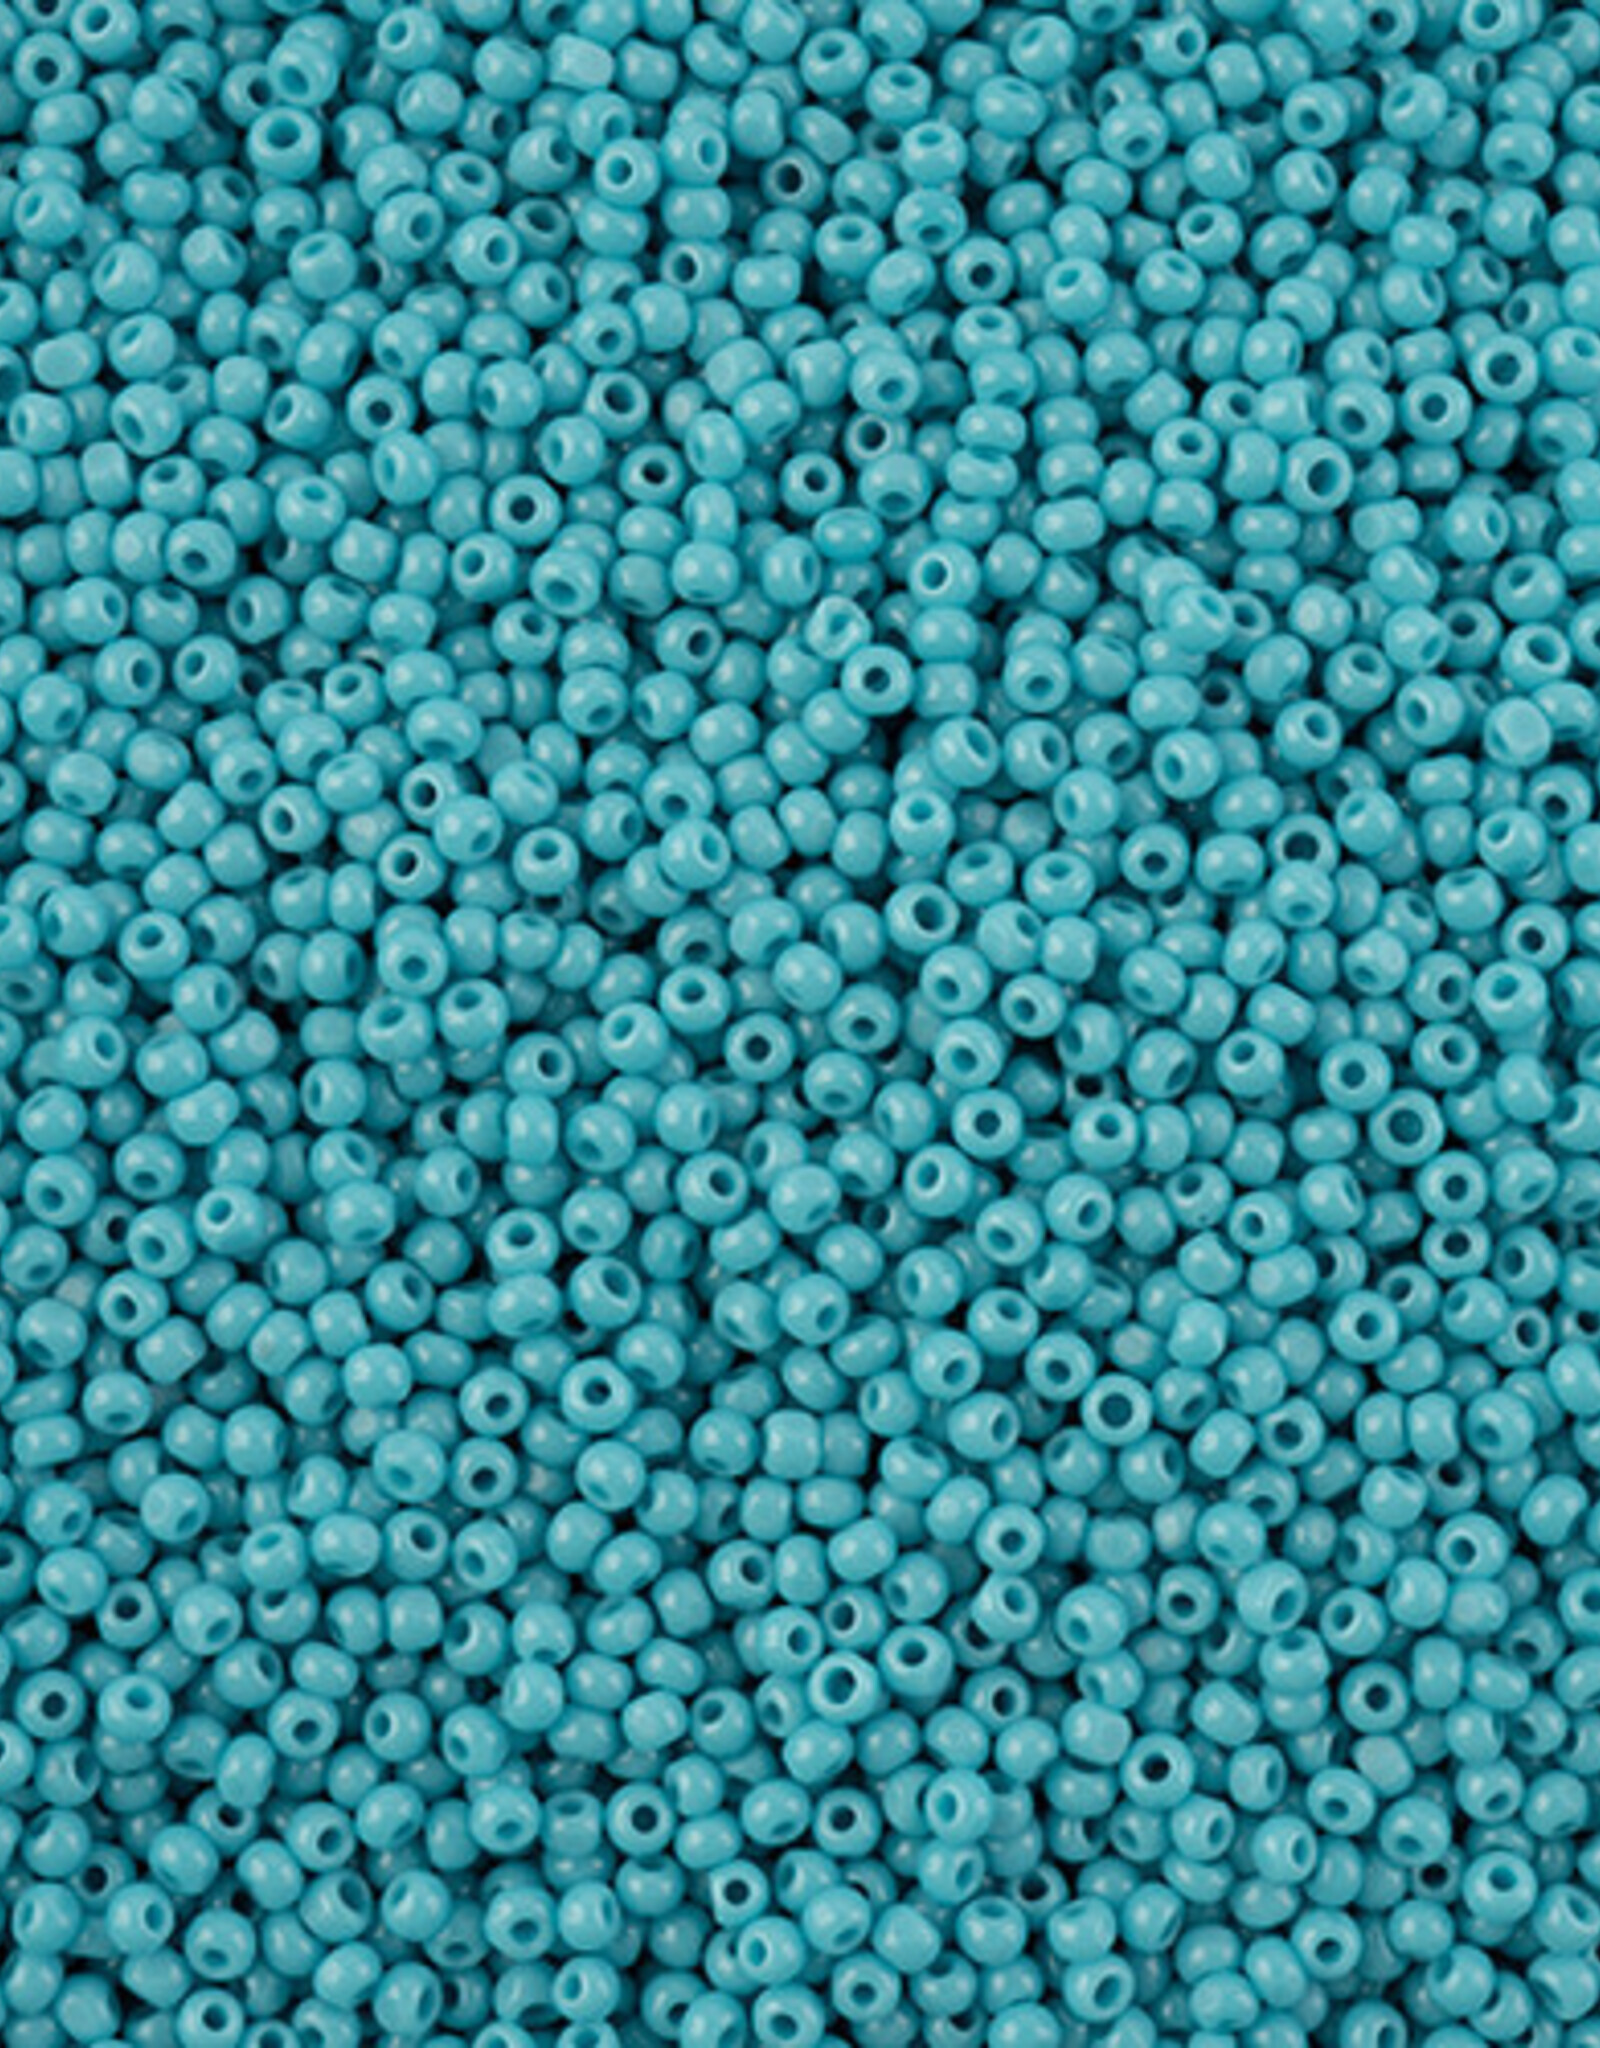 Czech Seed Bead 11/0 Cut Opaque Turquoise/Blue 100 G bag Loose